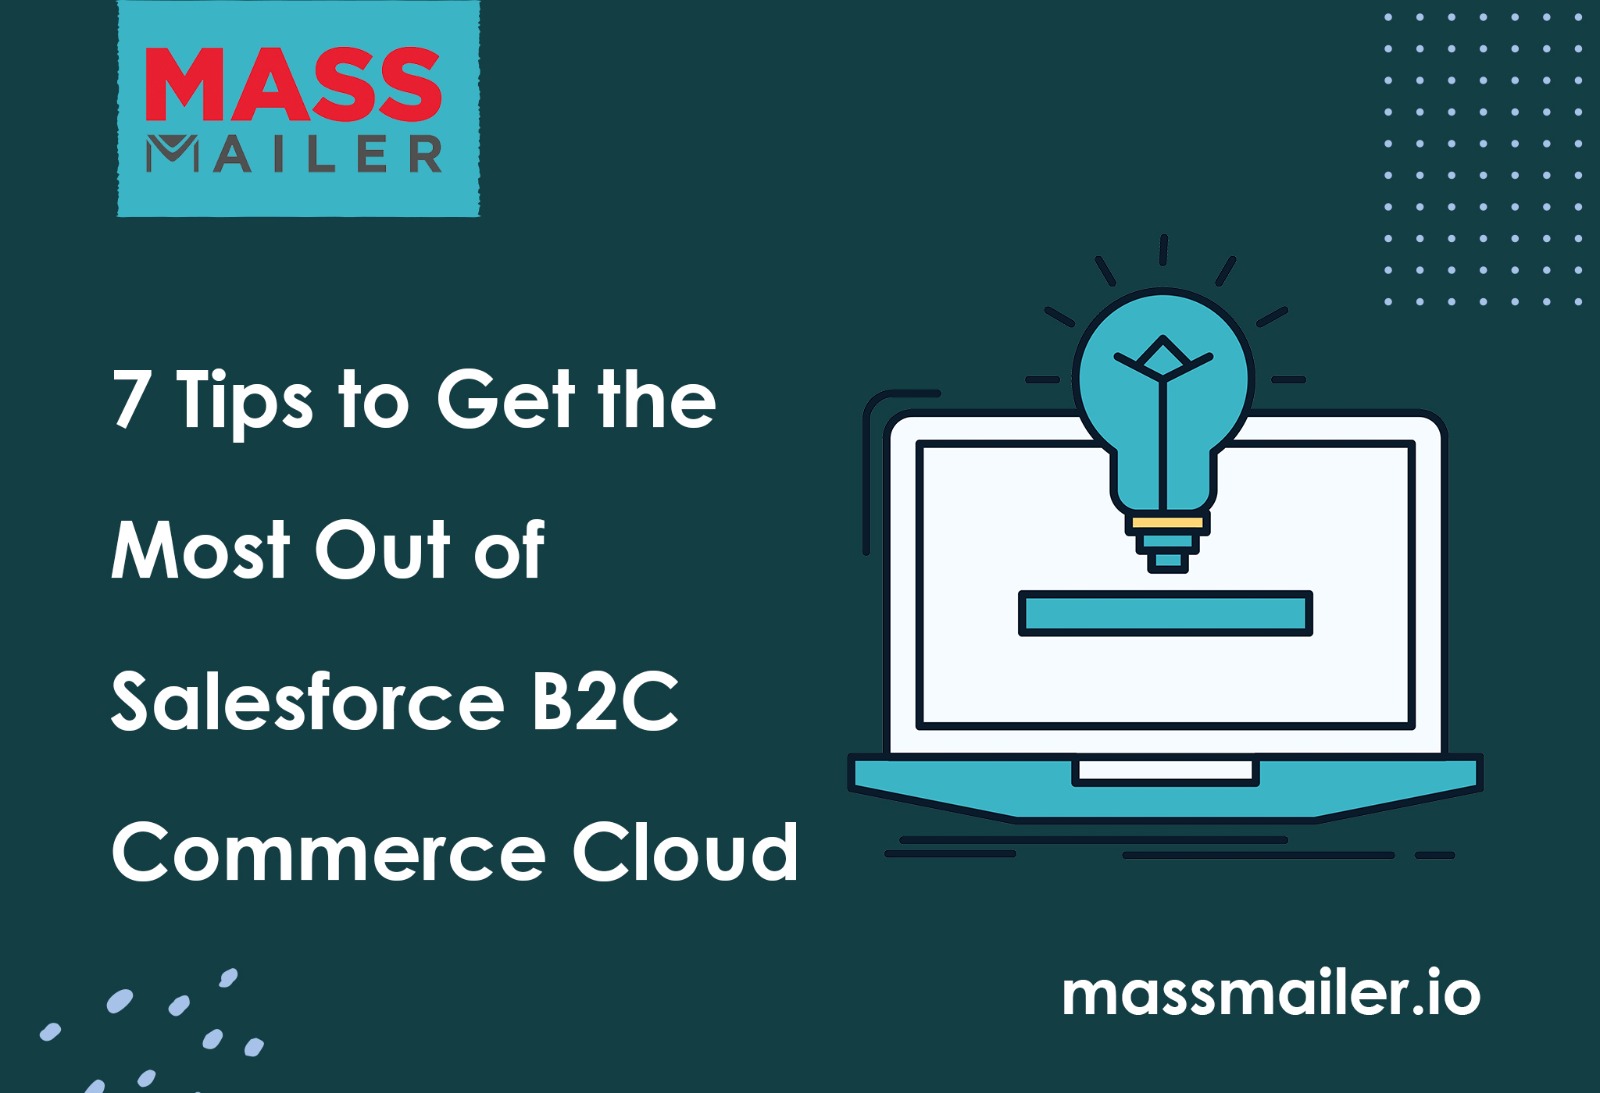 7 Tips to Get the Most Out of Salesforce B2C Commerce Cloud